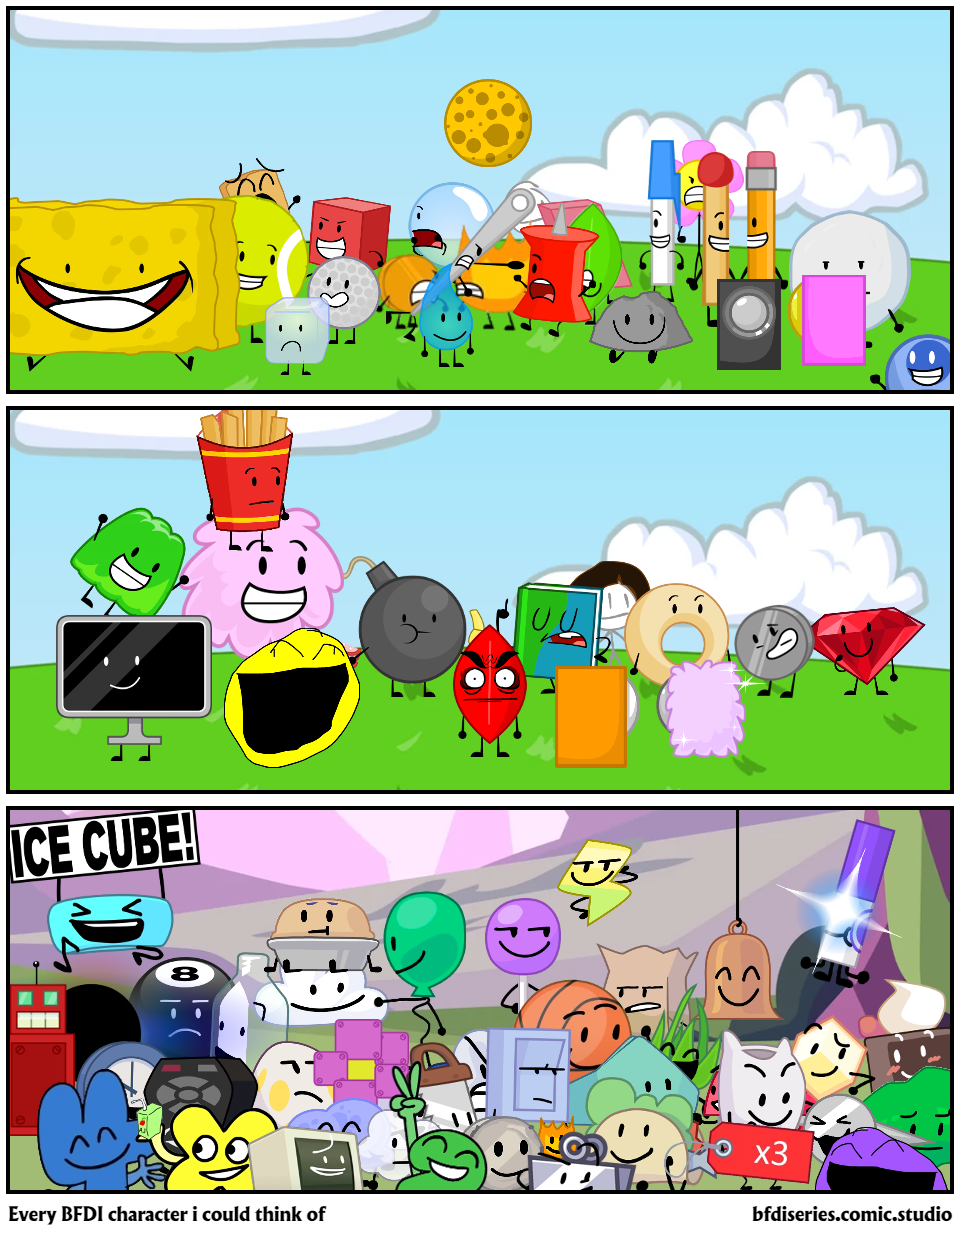 Every BFDI character i could think of - Comic Studio